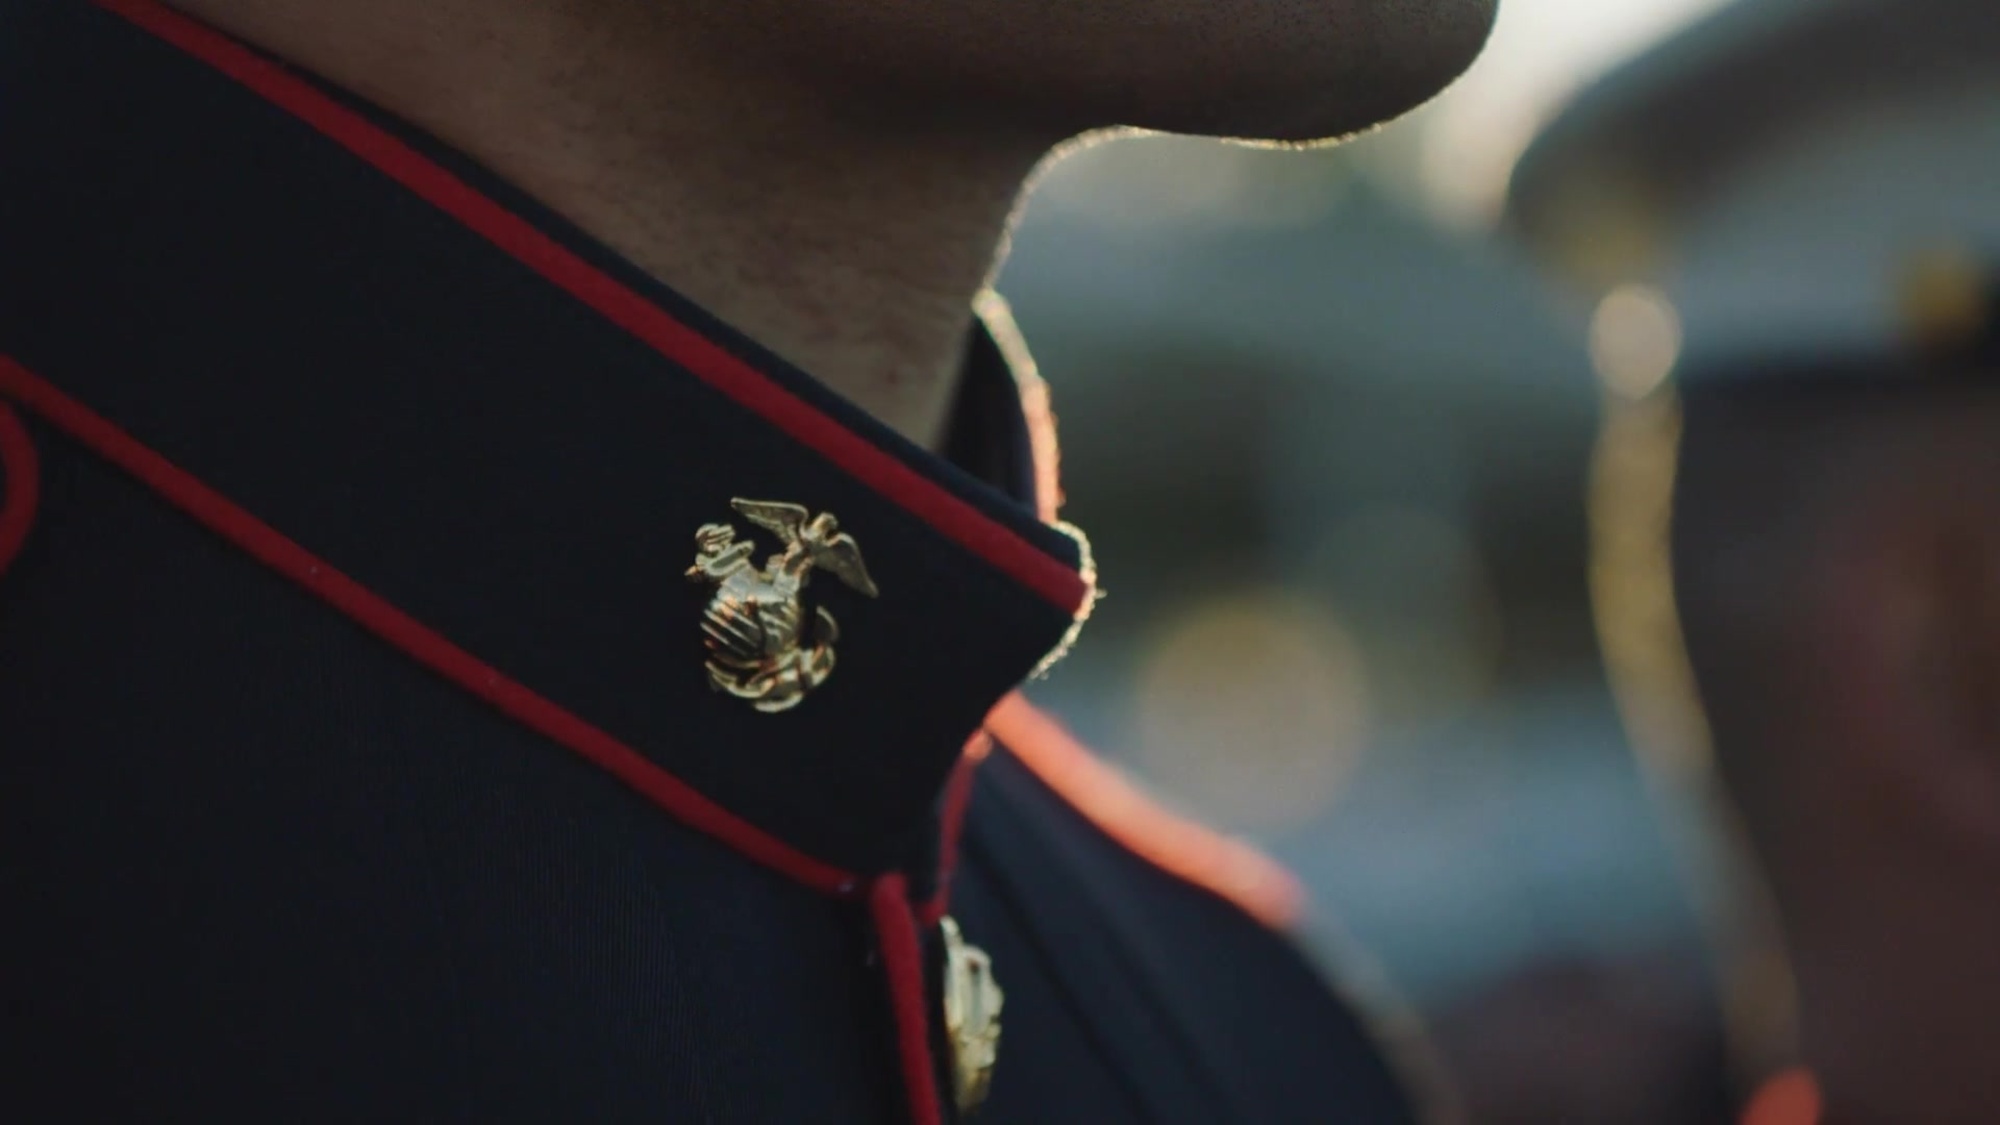 The latest Marine Corps Recruiting Command campaign is designed to reach prospects who are disaffected and isolated in an increasingly mobile and digital world. The key message "Purpose isn't found in your feed, it's revealed in your fight," challenges the prospects to find purpose, belonging and common cause through service to our Nation as United States Marines.